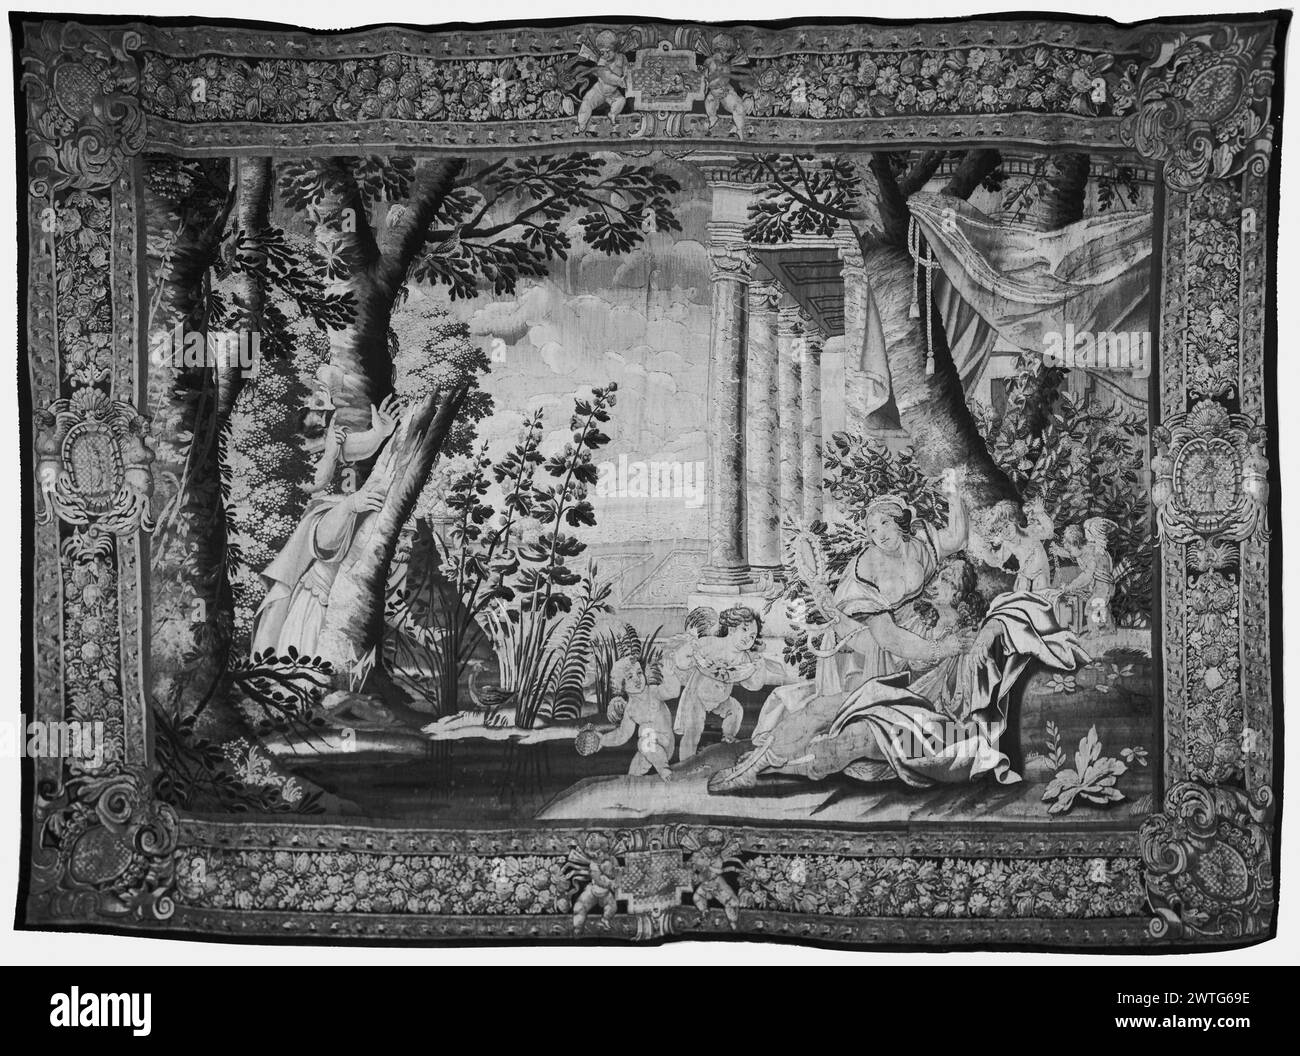 Carlo and Ubaldo find Rinaldo in Armida's garden. Vouet, Simon (French, 1590-1649) (designed after) [painter] c. 1660 Tapestry Dimensions: H 11'3' x W 15'8' Tapestry Materials/Techniques: unknown Culture: French Weaving Center: Paris Ownership History: French & Co. purchased from Mrs. Garbisch (Jack Chrysler), received 9/26/1940; sold to Alfred Jaeger 3/6/1966. Rinaldo & Armida attended by putti who bring drink of water from a stream (L) & bring jewelry from casket (R), in wooded setting with row of columns of classical building & garden park in background (BRD) floral garland; (UPR & LWR BRD) Stock Photo